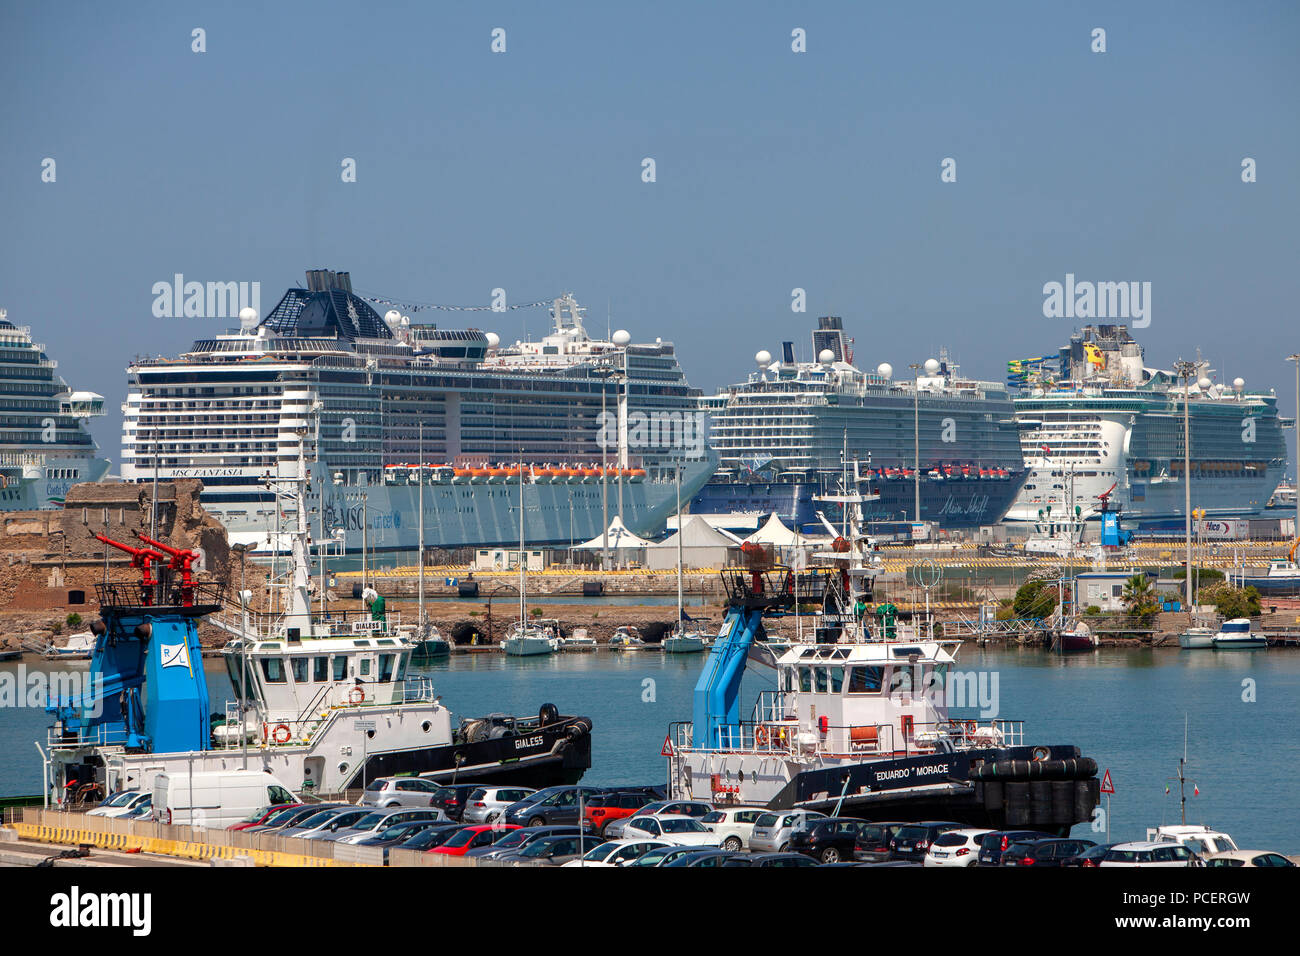 The TUI Mein Schiff 6, MSC Fantasia, Costa Diadema and Royal Caribbean Independence of the Seas cruise ships all docked at Civitavecchia port in Italy Stock Photo